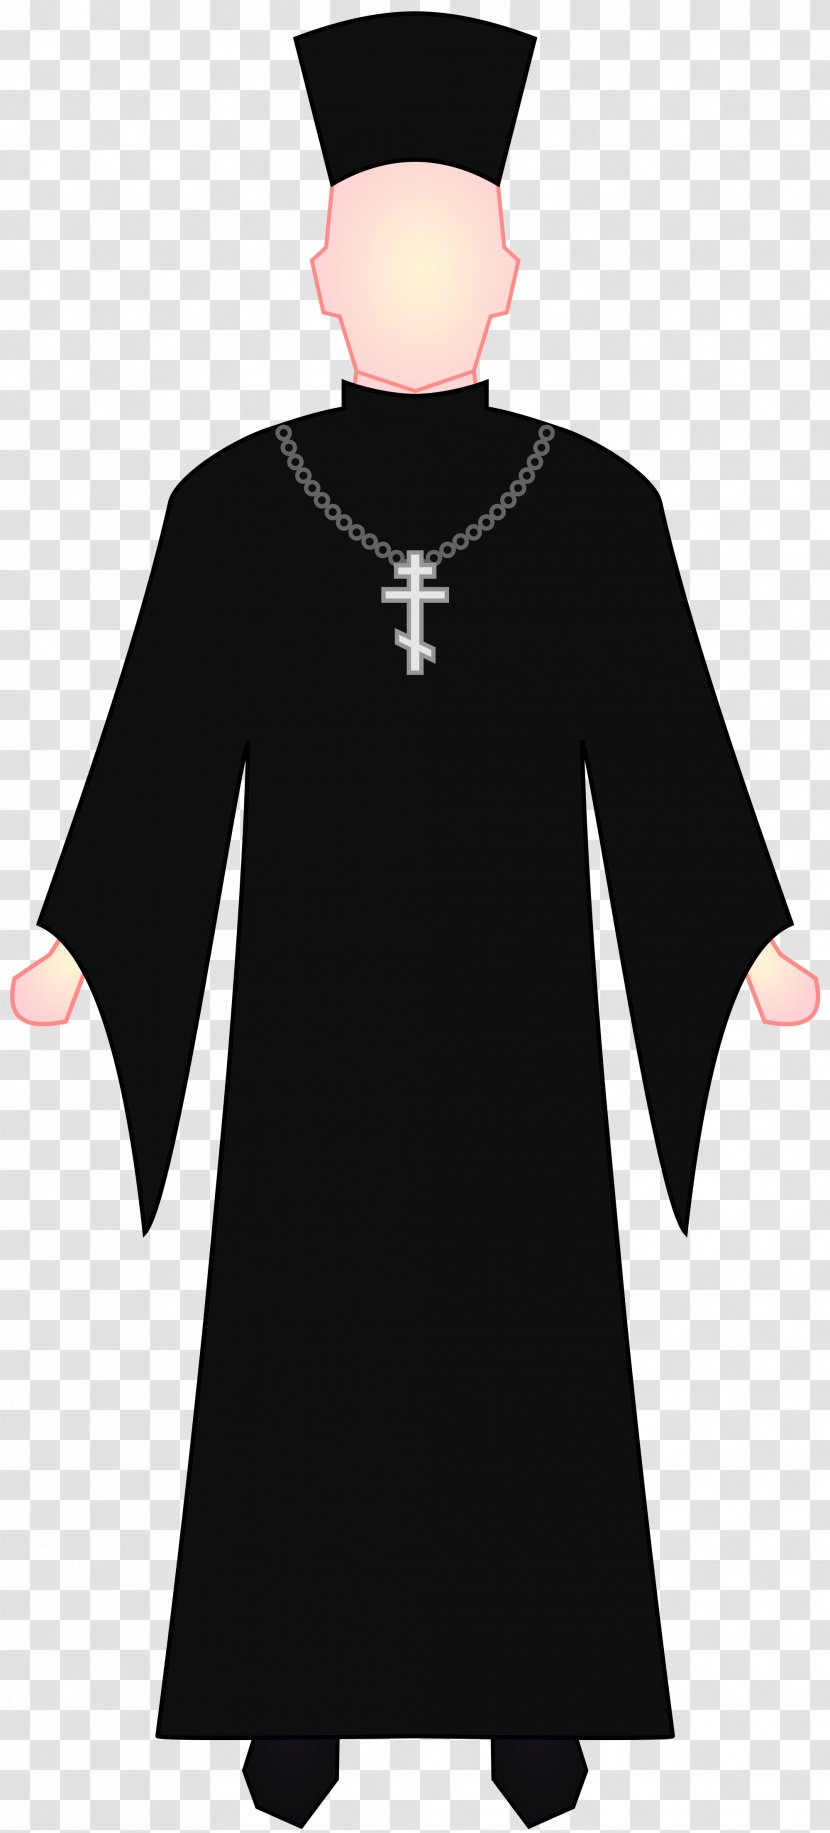 Russian Orthodox Church Robe Eastern Vestment Clip Art - Academic Dress - Clergy Cliparts Transparent PNG